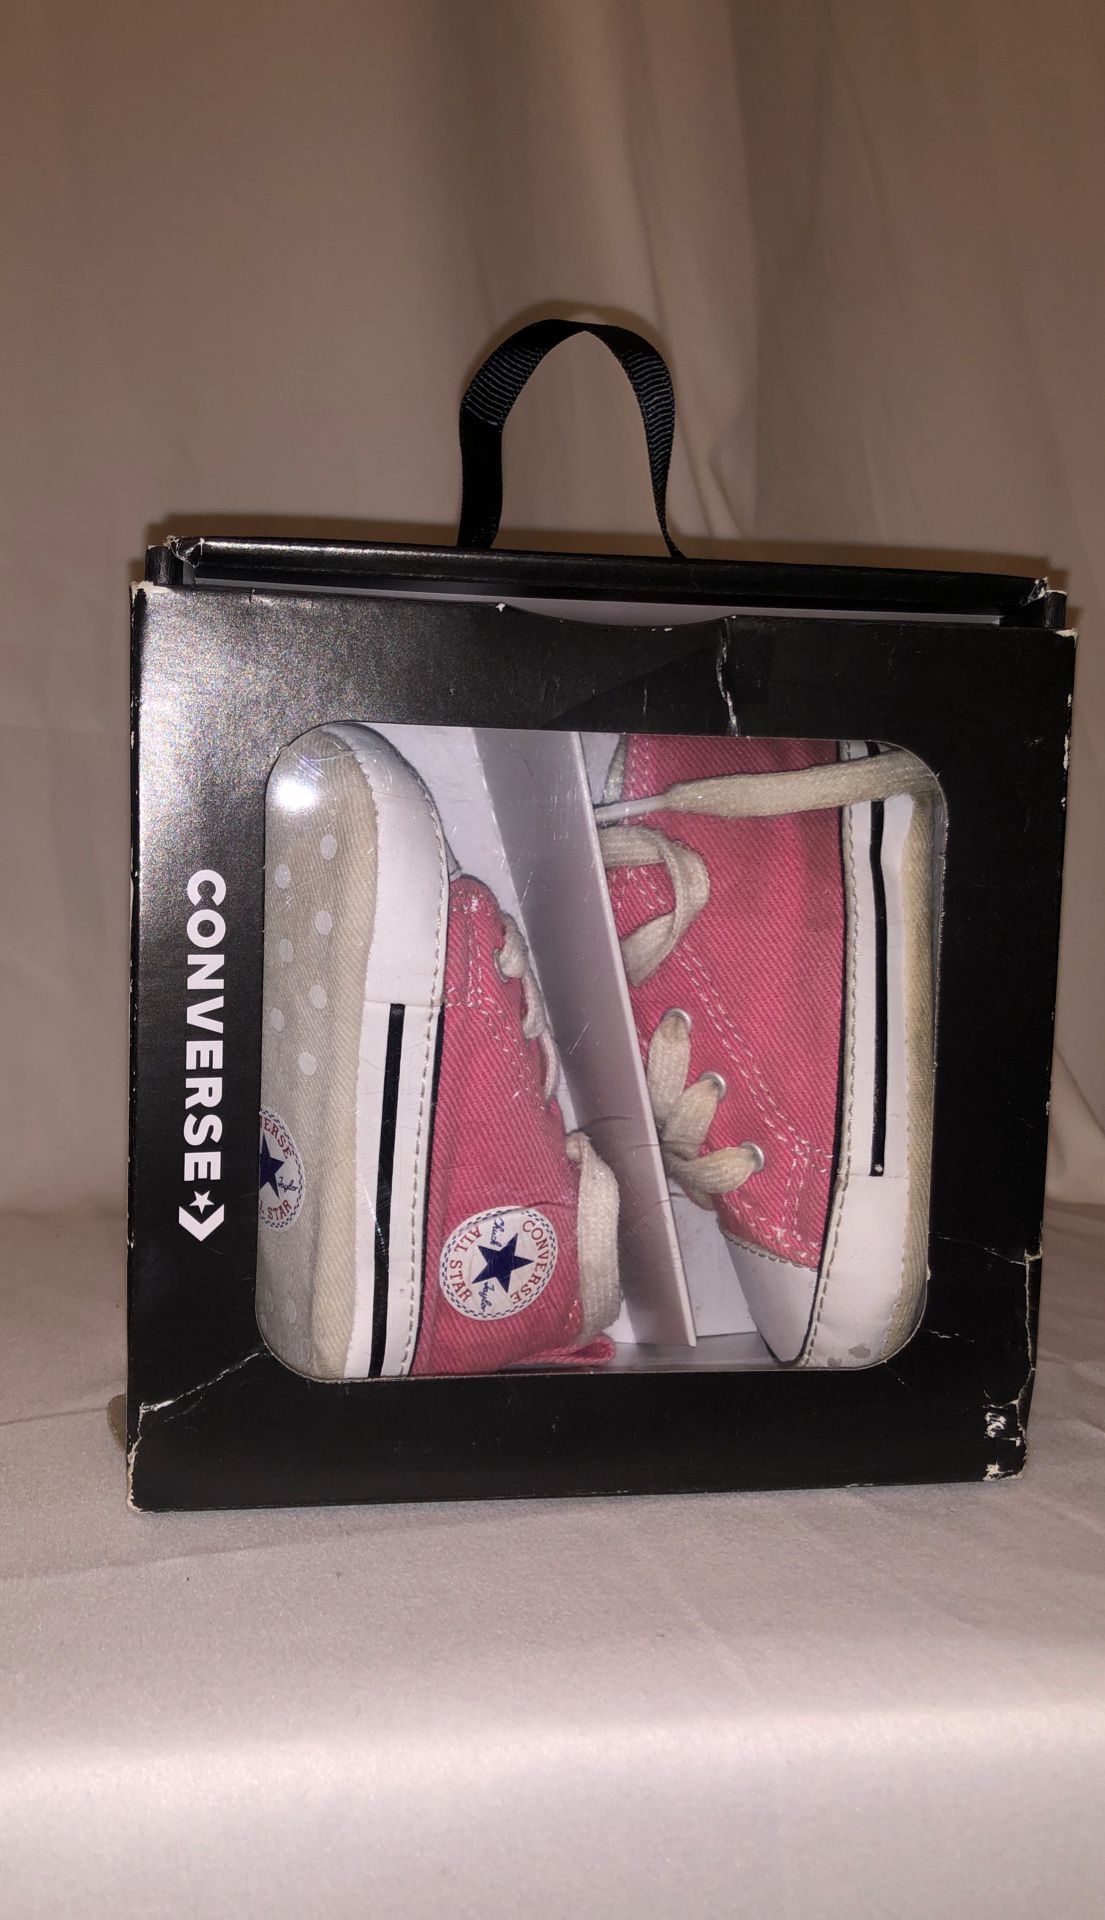 Pick up for $4! Size 2 Baby Pink All Star Converse Chuck Taylor